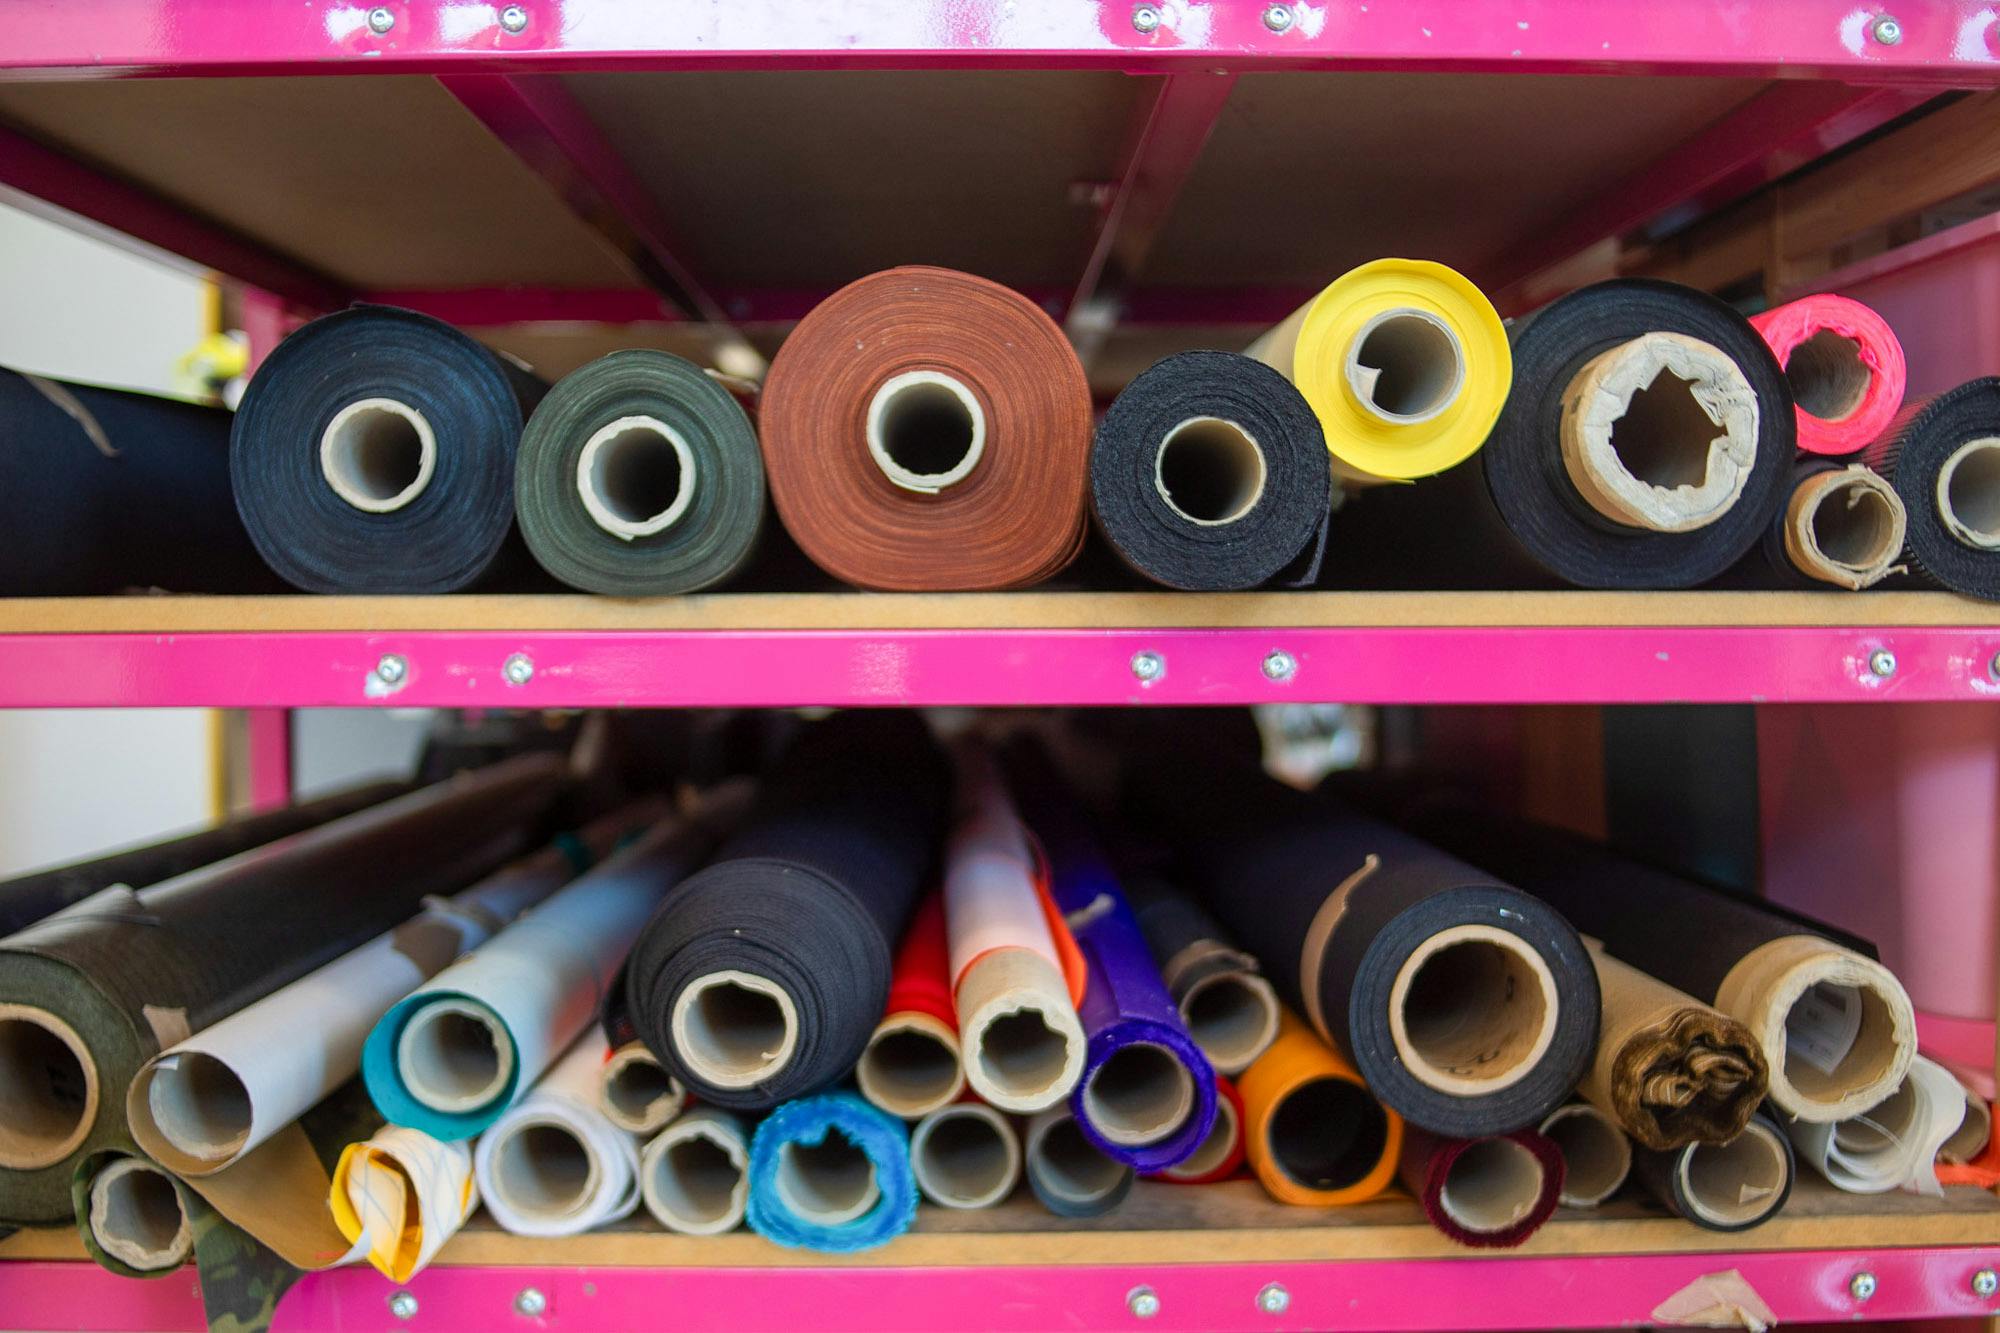 Rolls of material on a shelf.